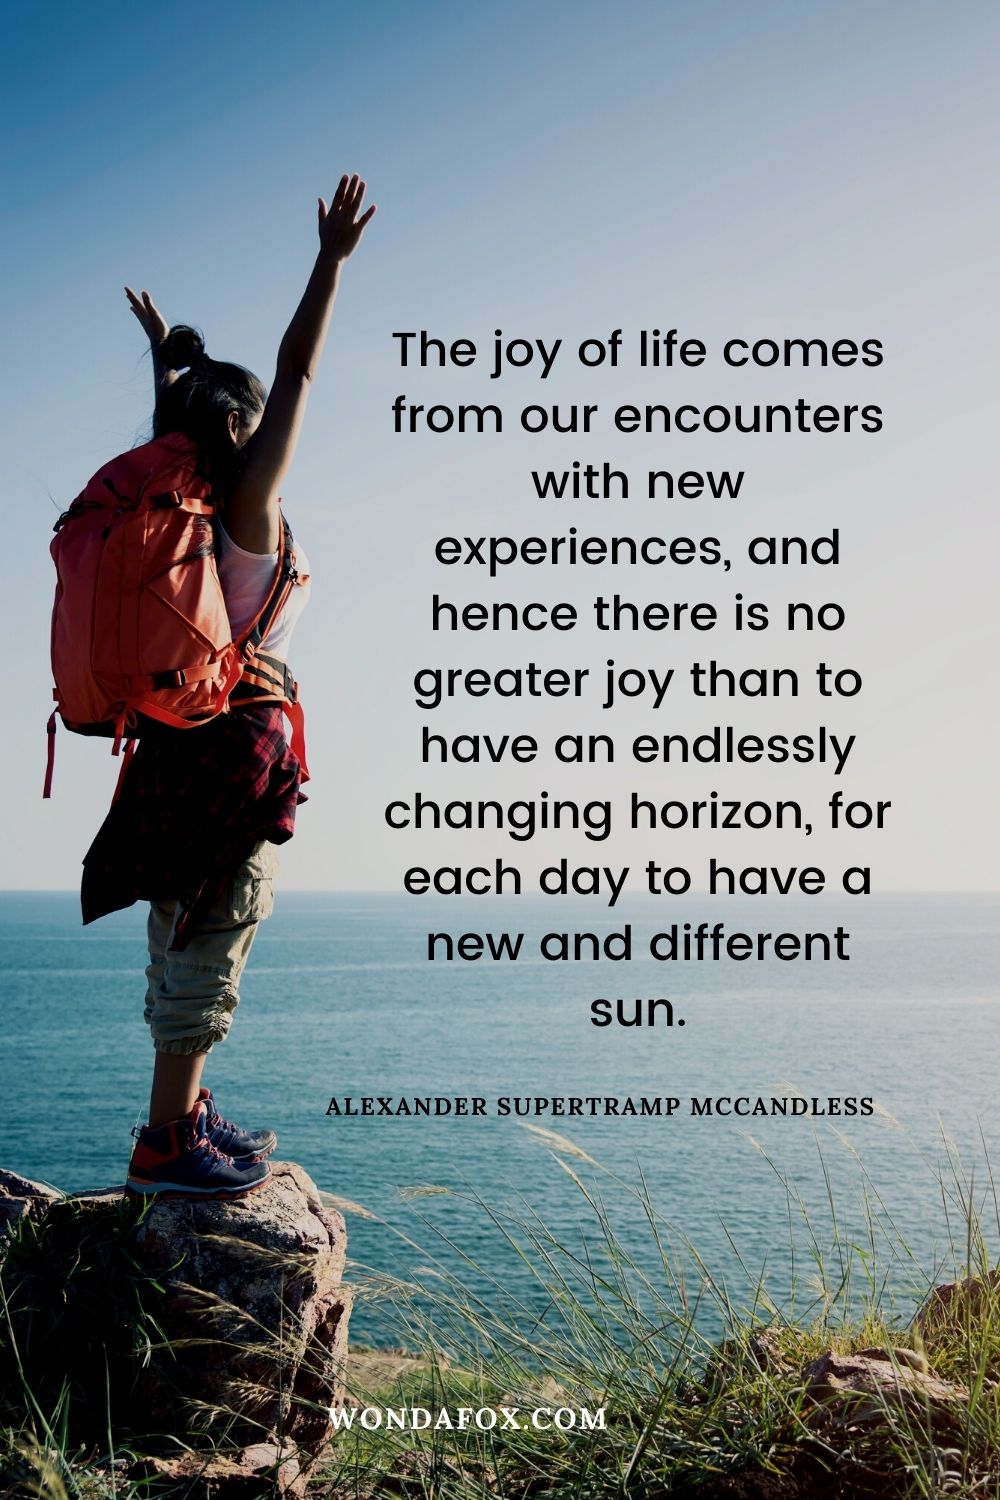 The joy of life comes from our encounters with new experiences, and hence there is no greater joy than to have an endlessly changing horizon, for each day to have a new and different sun.